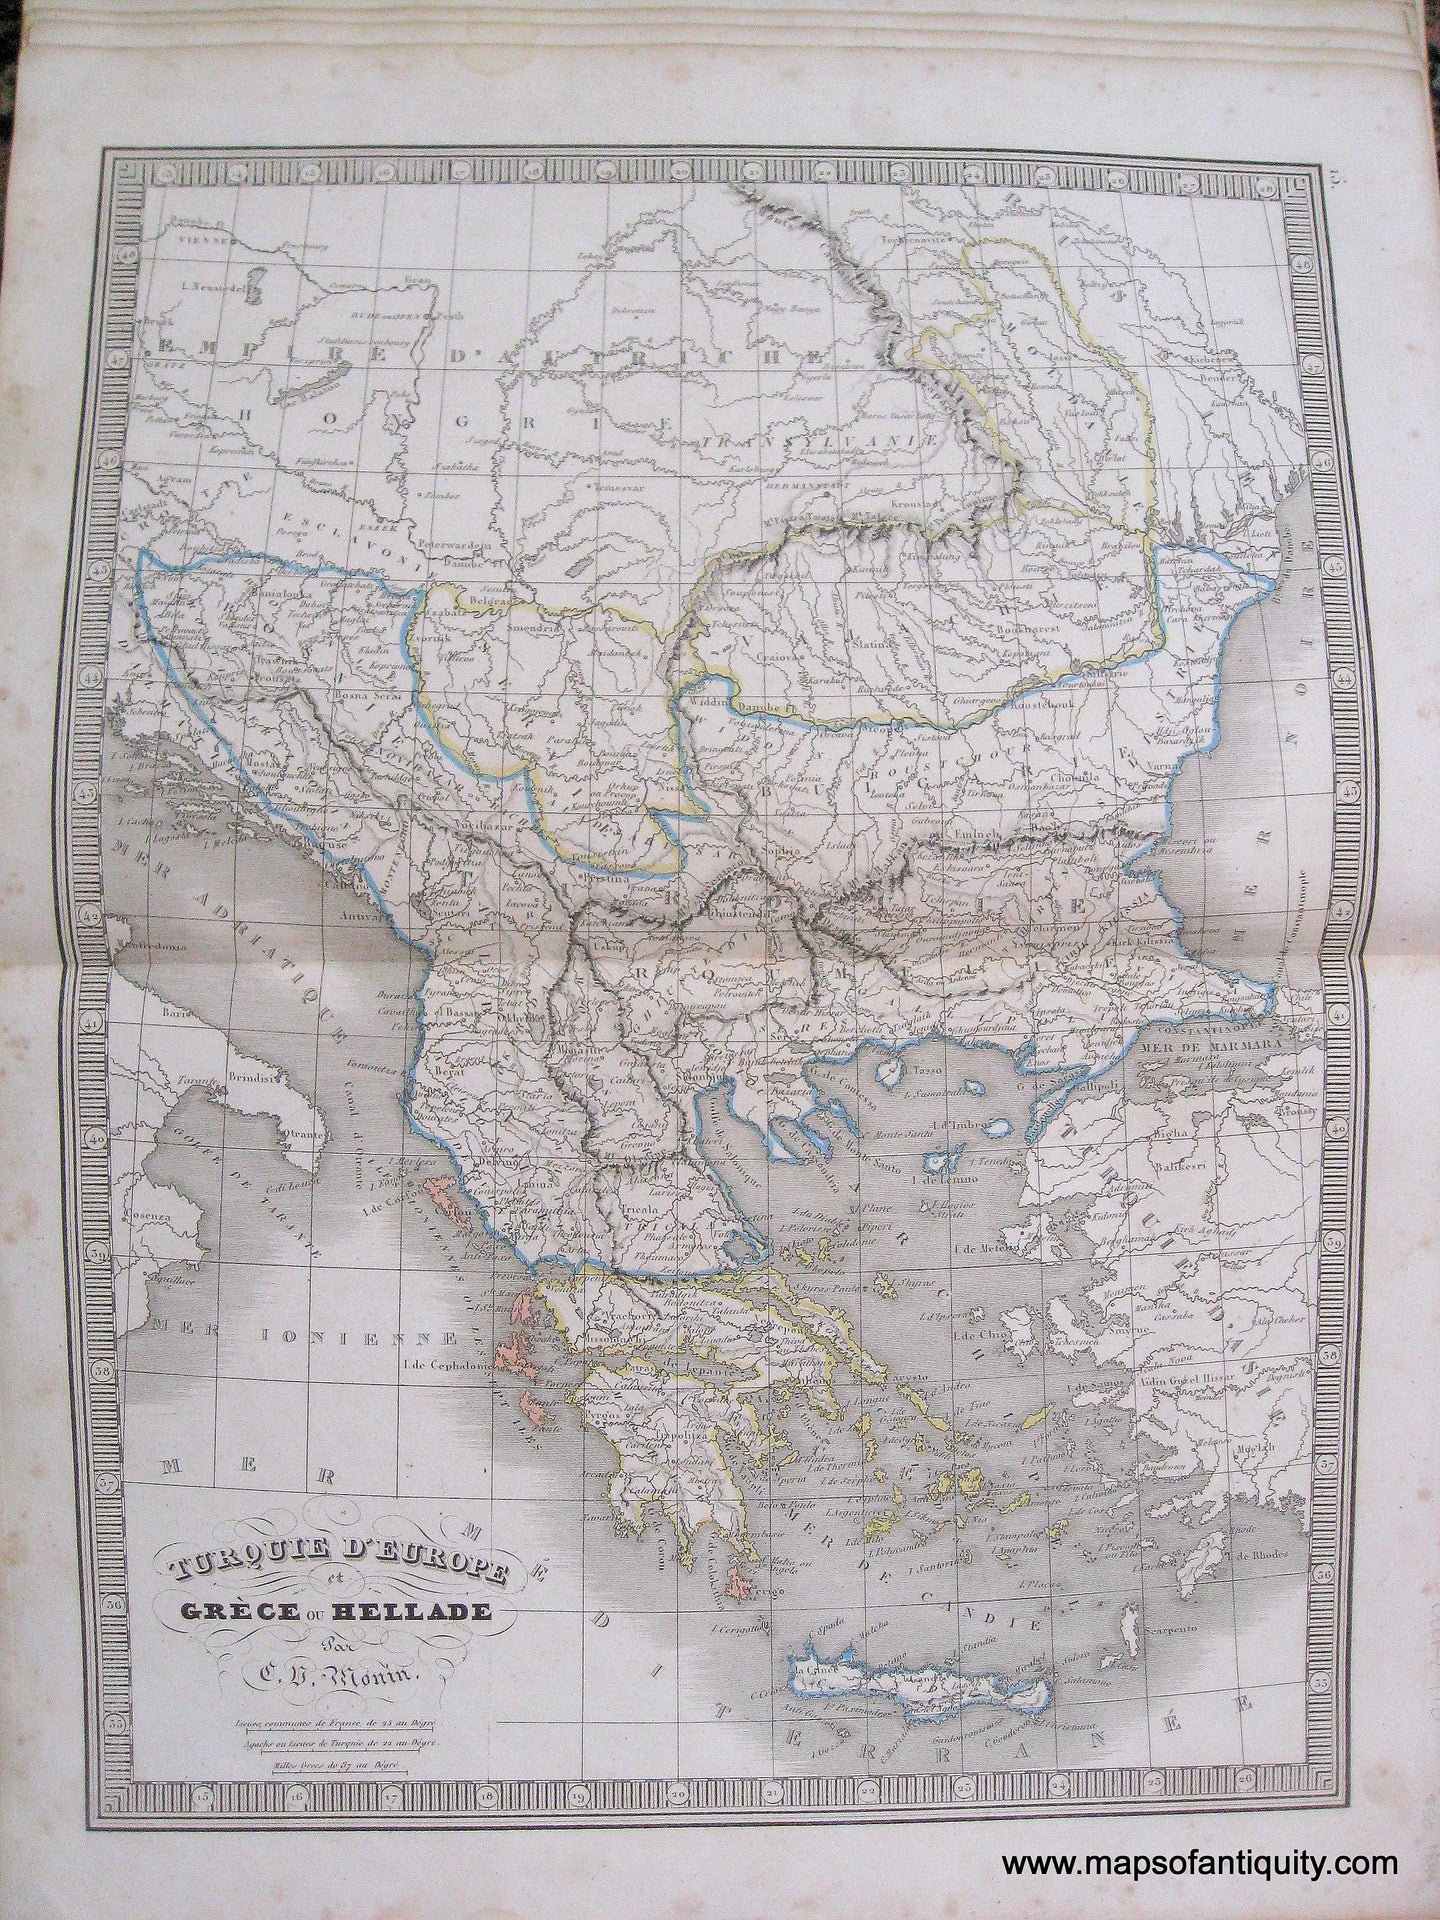 Antique-Hand-Colored-Map-Turquie-d'Europe-et-Grece-ou-Hellade-(Turkey-in-Europe-and-Greece)-1846-Monin-1800s-19th-century-Maps-of-Antiquity